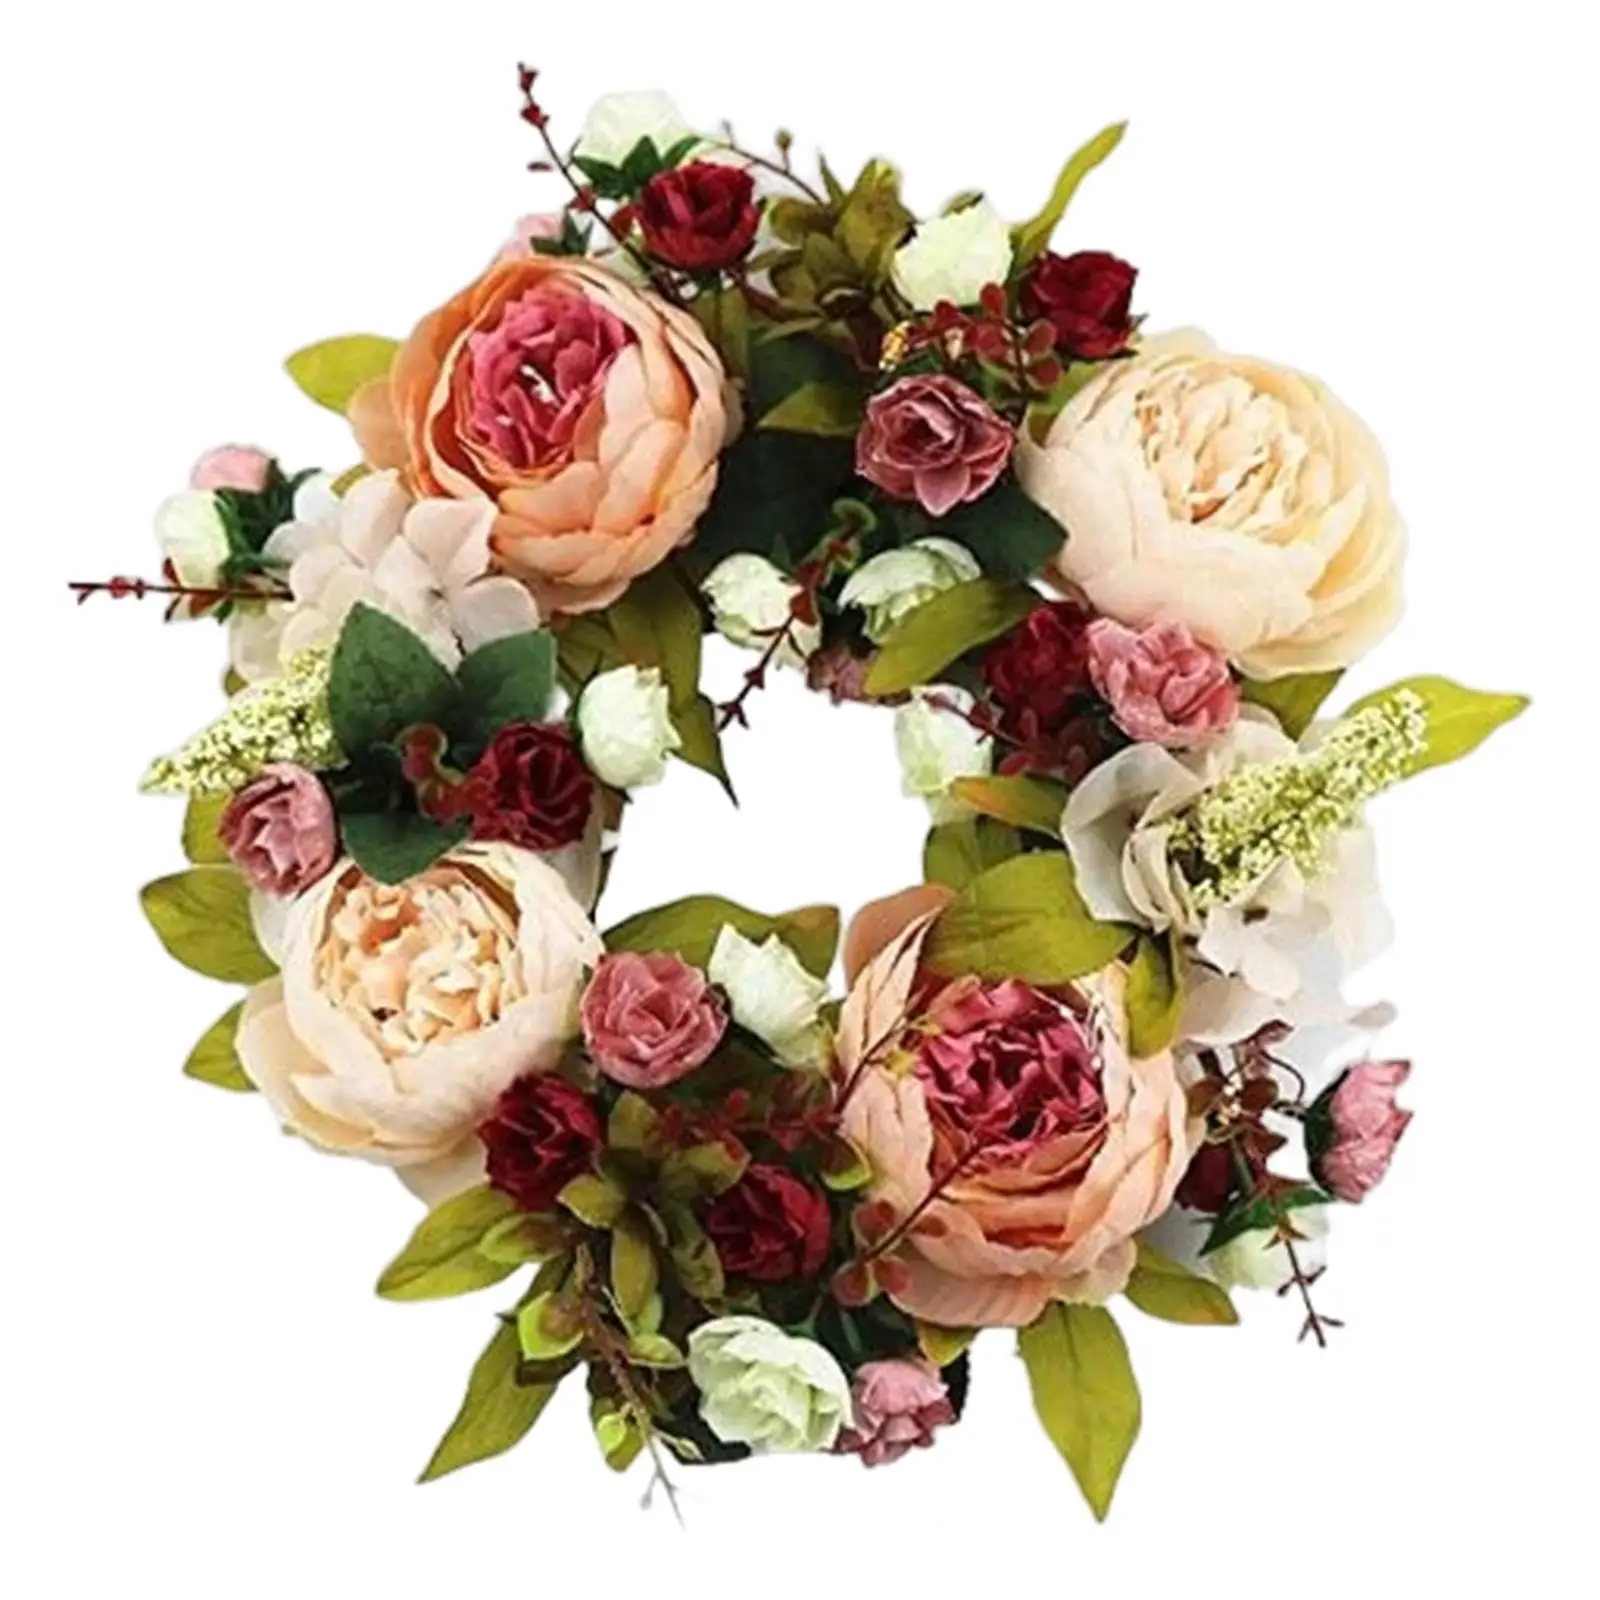  Wreath Faux Floral Wreath Spring Garland   Hanging Ornaments